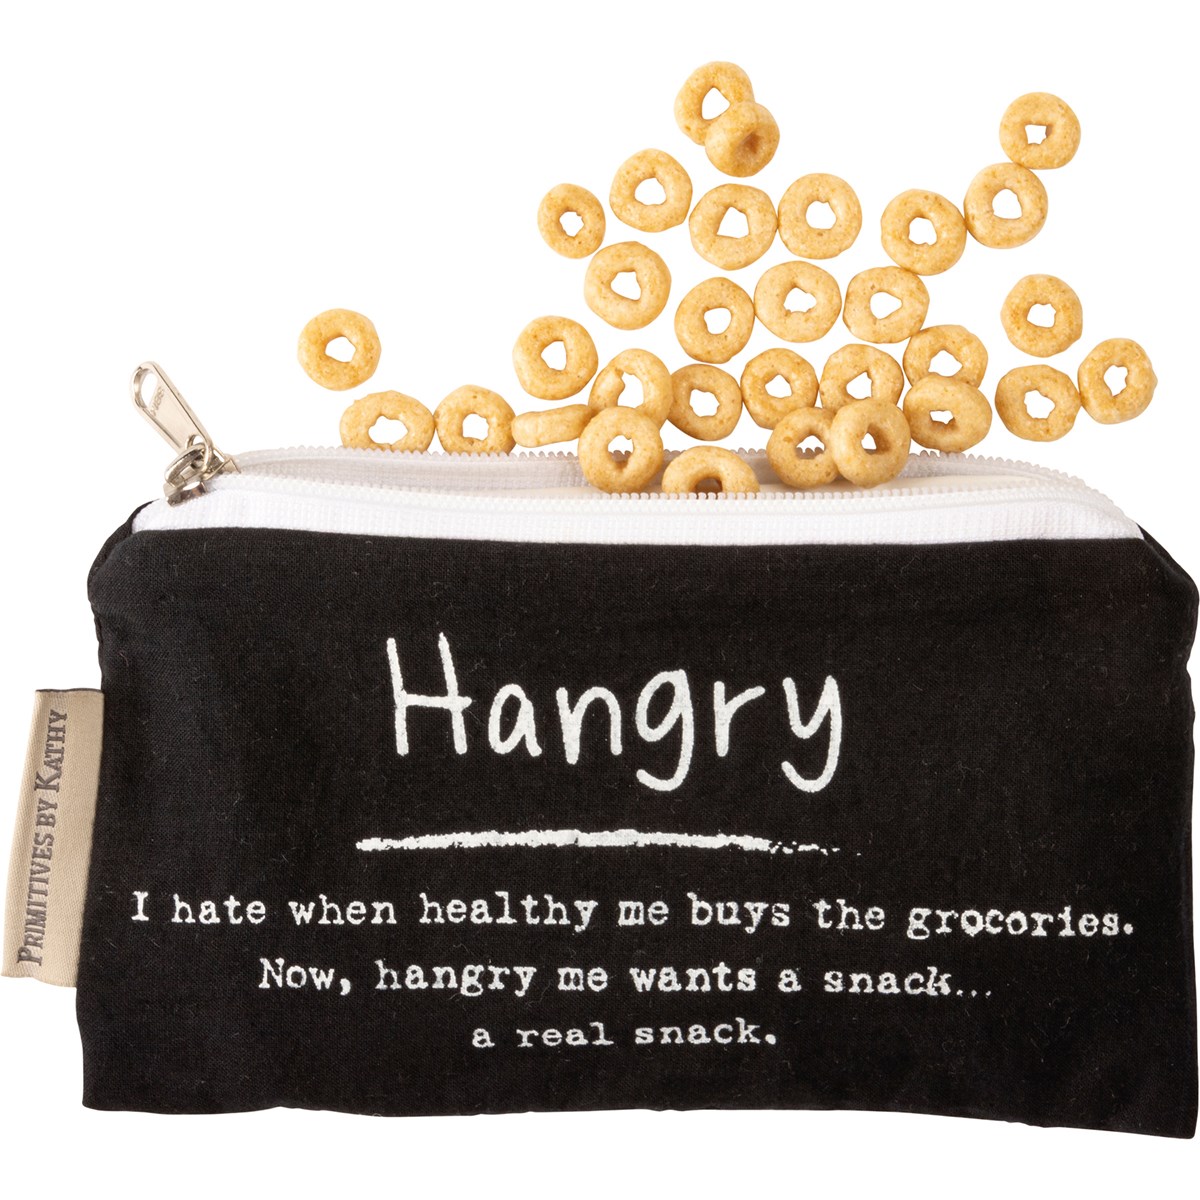 Hangry & Snacks Everything Pouch Set - Cotton, Faux Leather, Metal